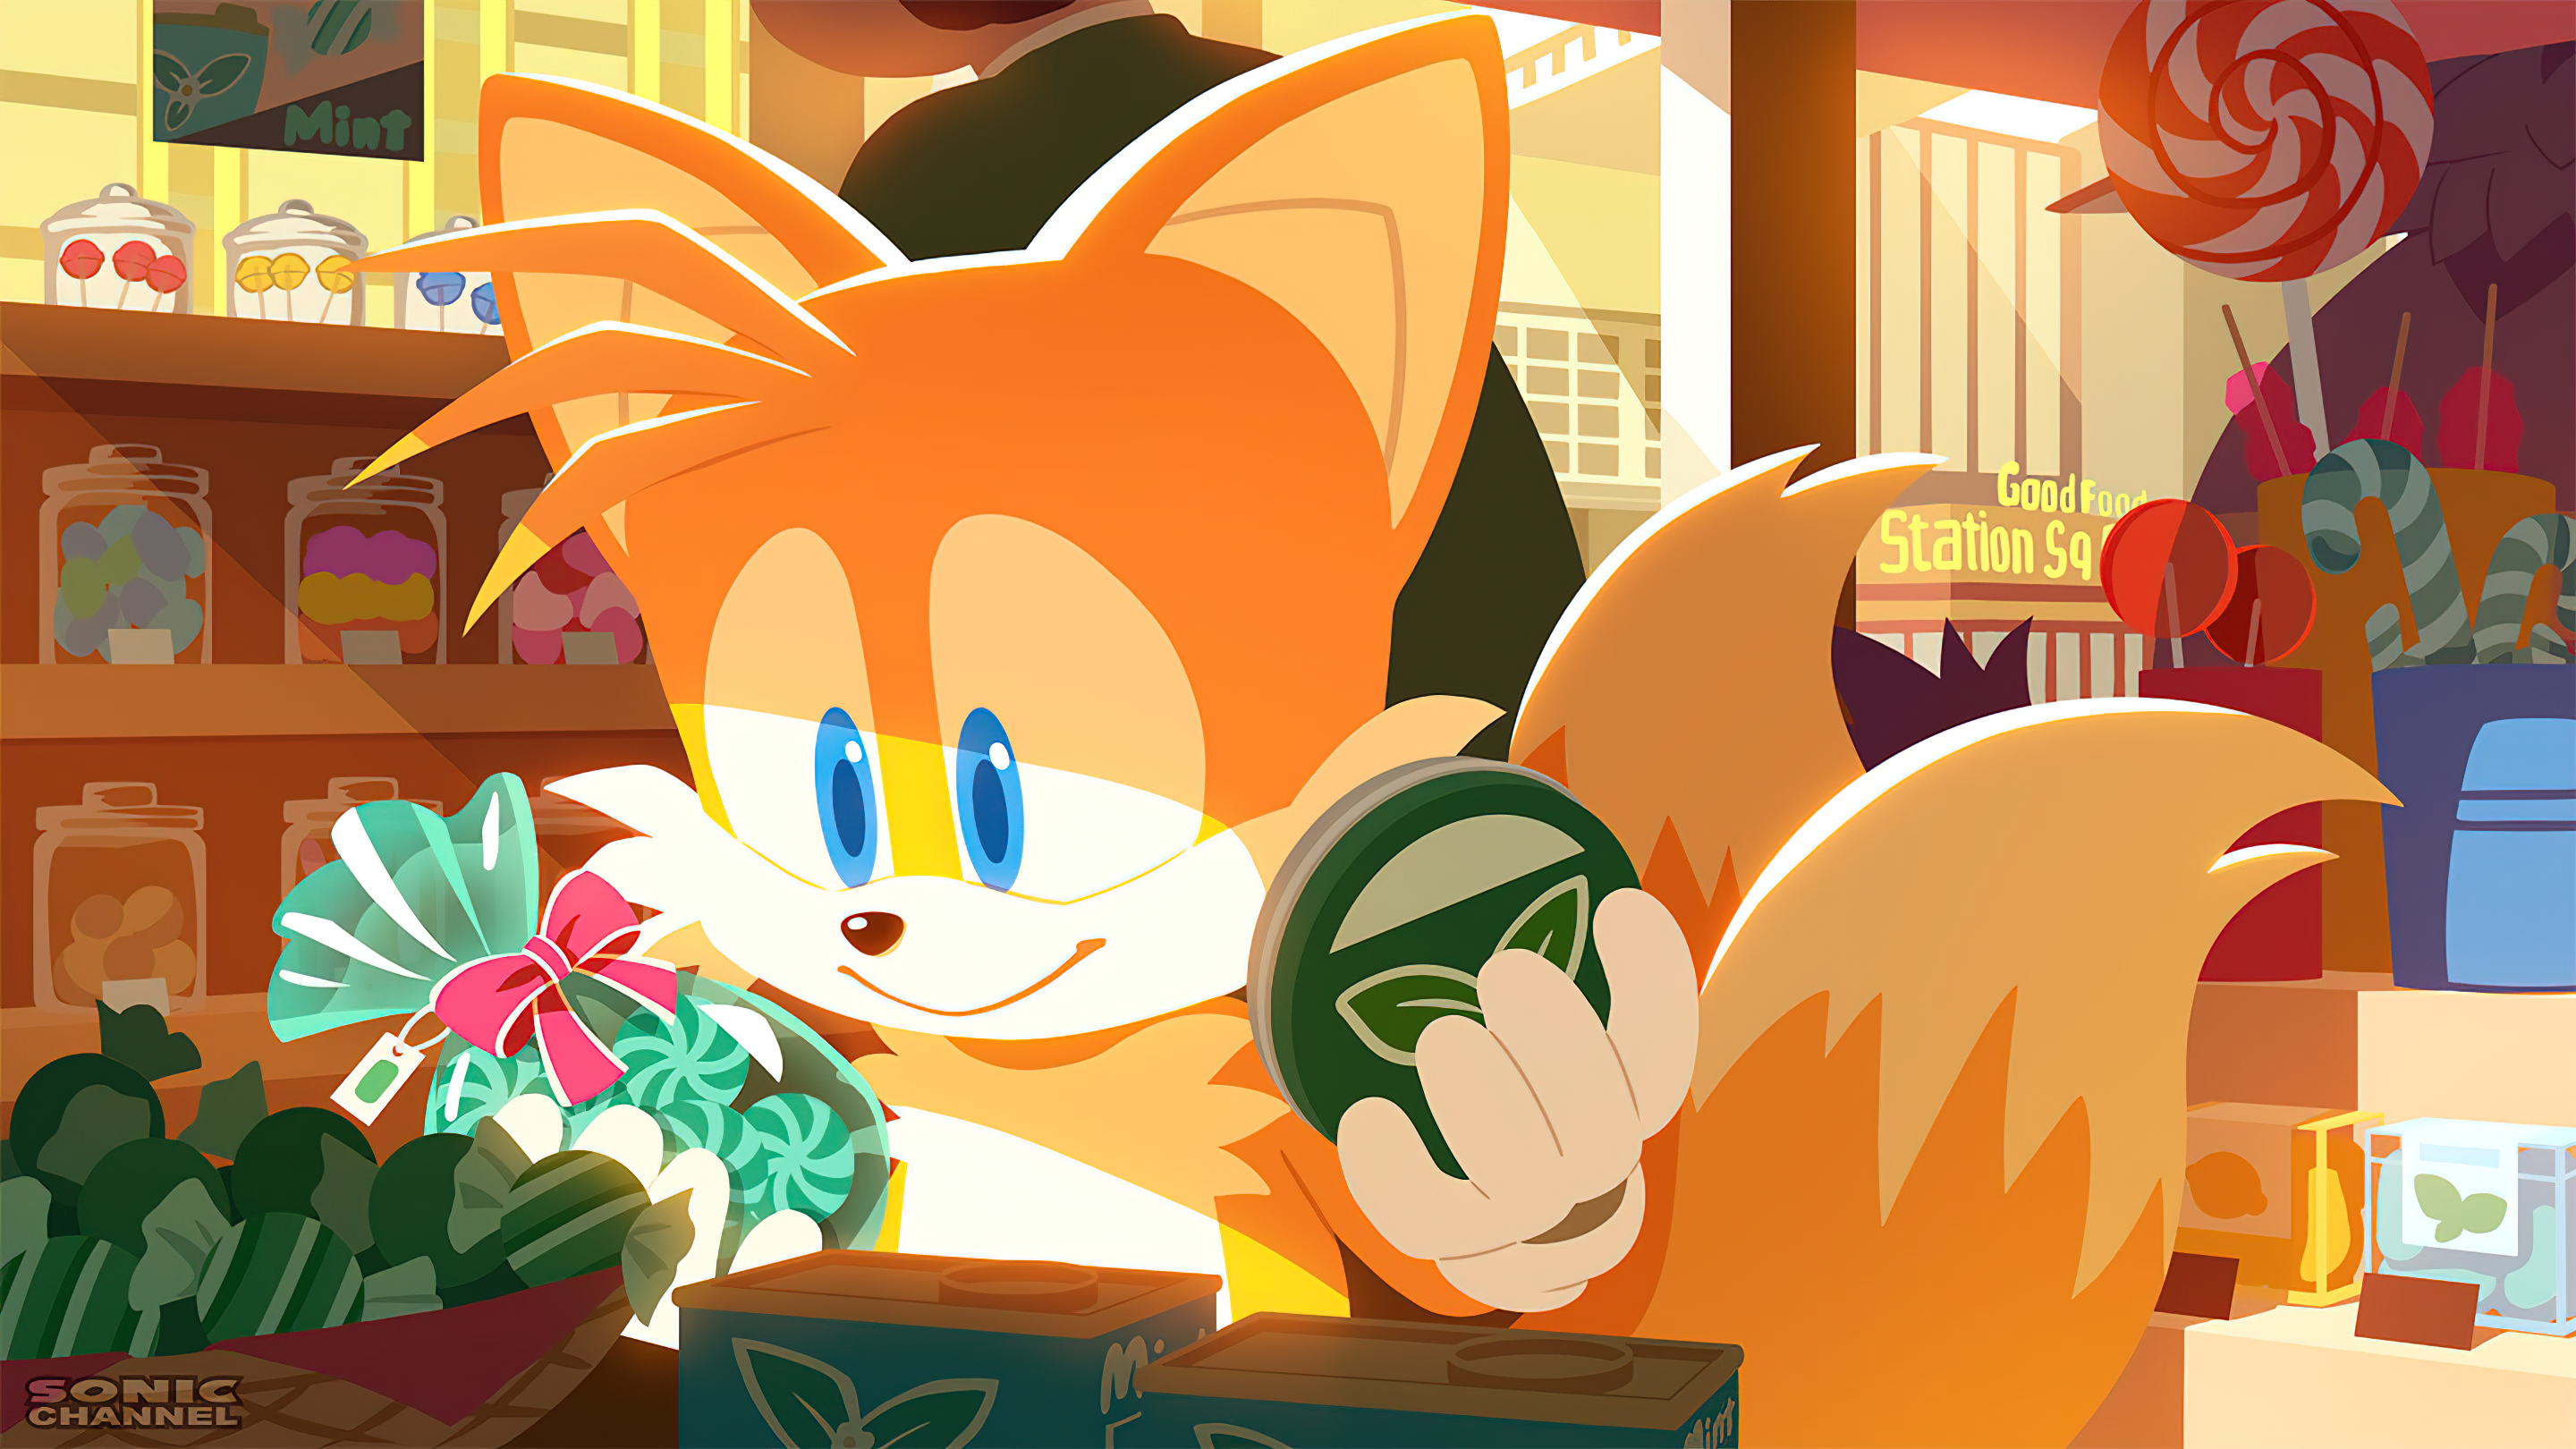 Sonic Sonic The Hedgehog Tails Character Fox Sega Video Game Art Comic Art Candy Shopping Stores Lol 2880x1620